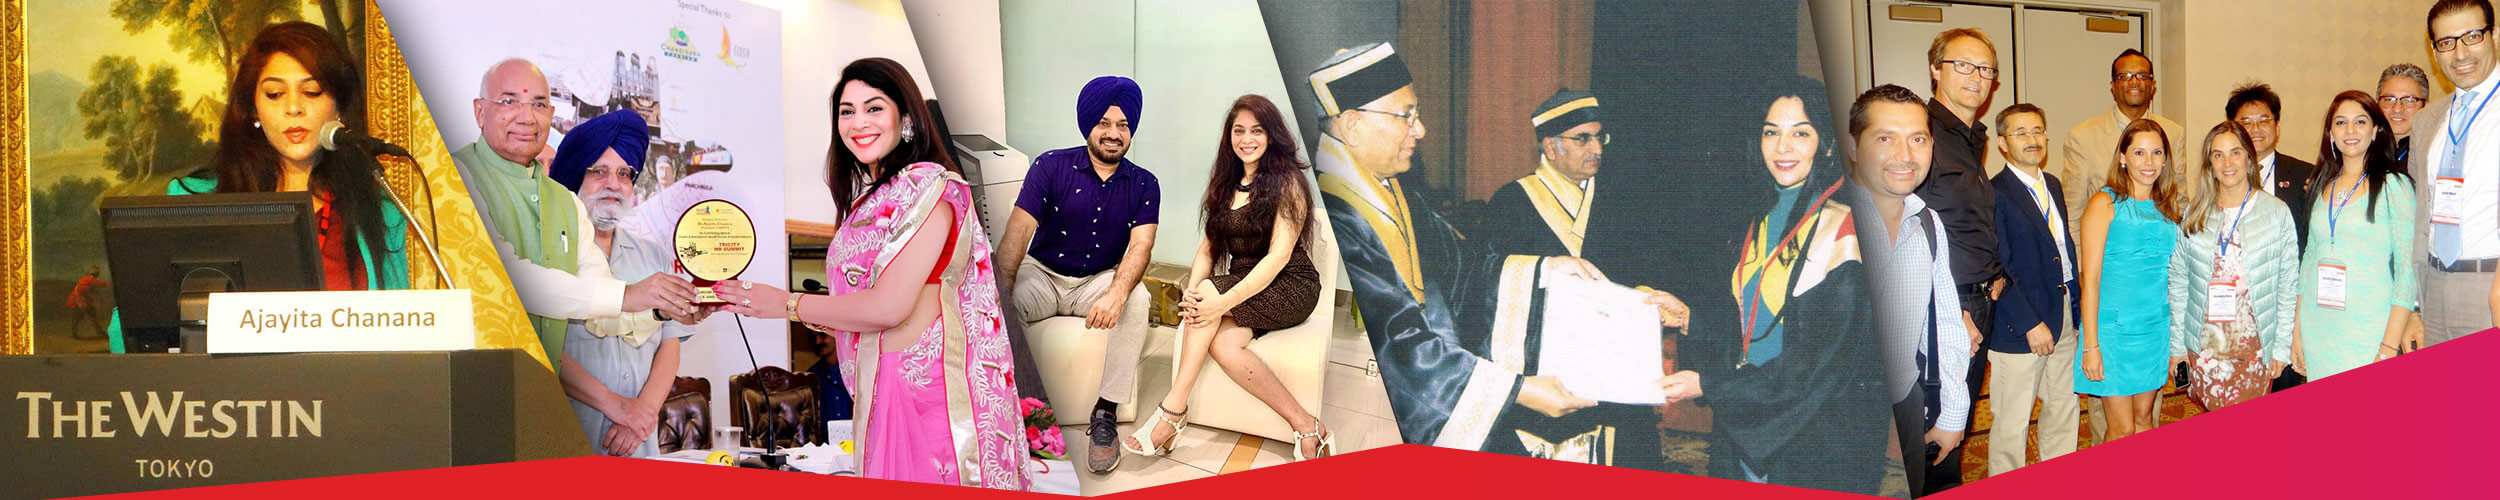 Gurpreet Ghuggi and many more are among Dr. Ajayita's esteemed clients.